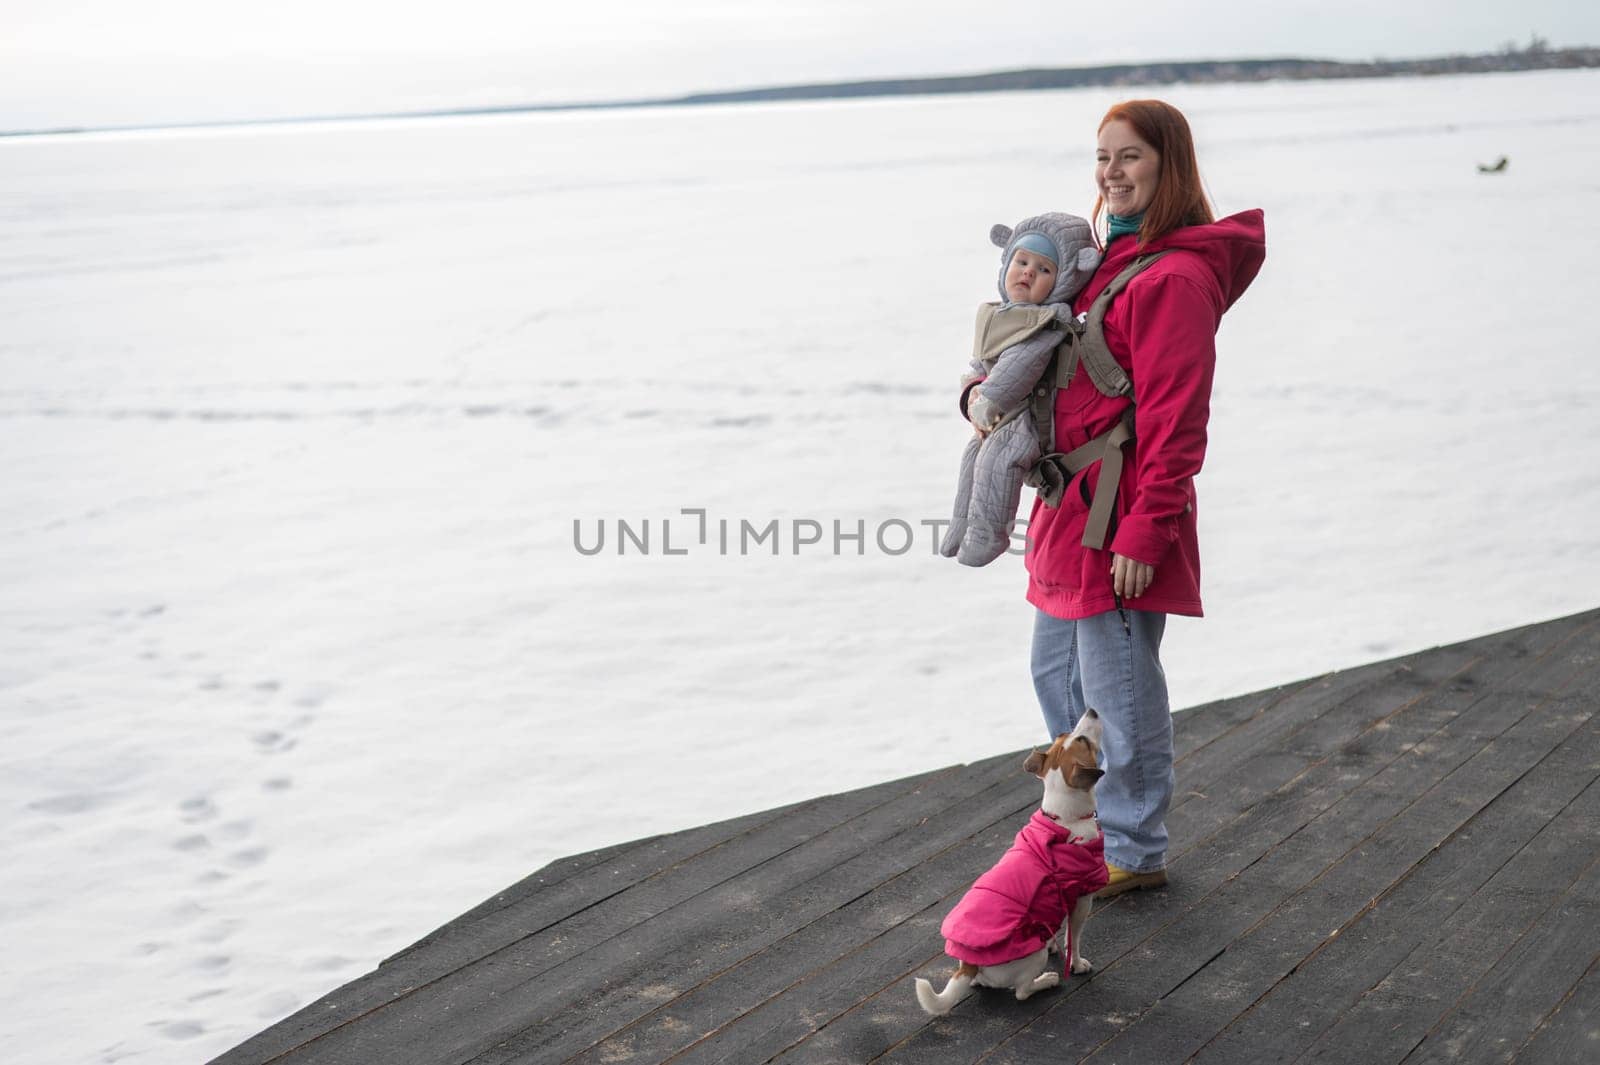 Caucasian woman walks with her son in an ergo backpack and a Jack Russell terrier dog in nature in winter